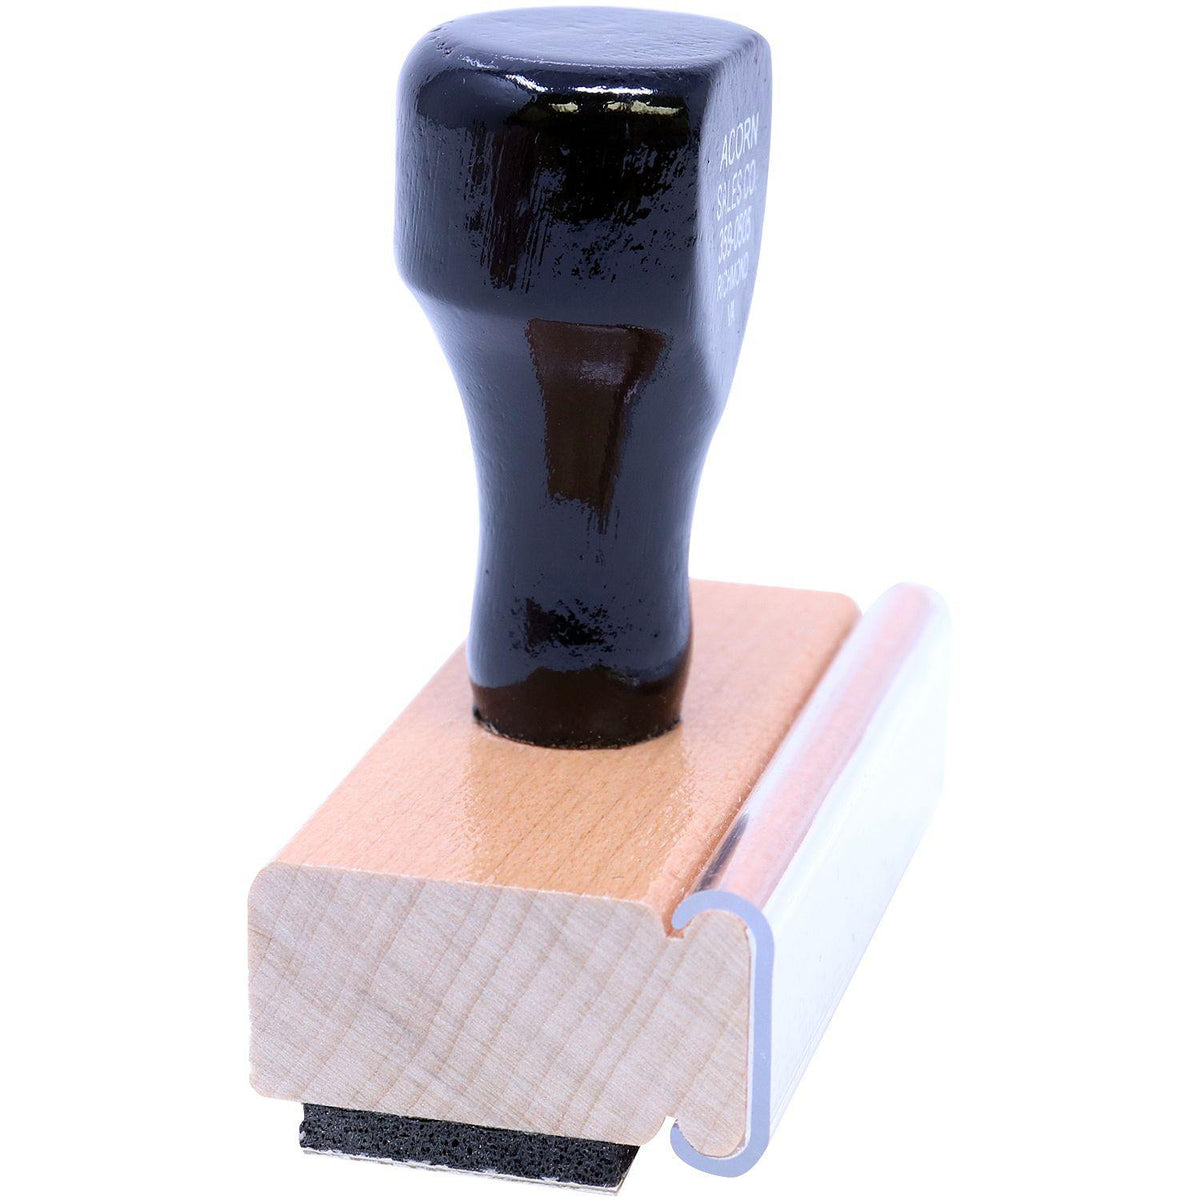 Side View of Large Invoice Rubber Stamp at an Angle